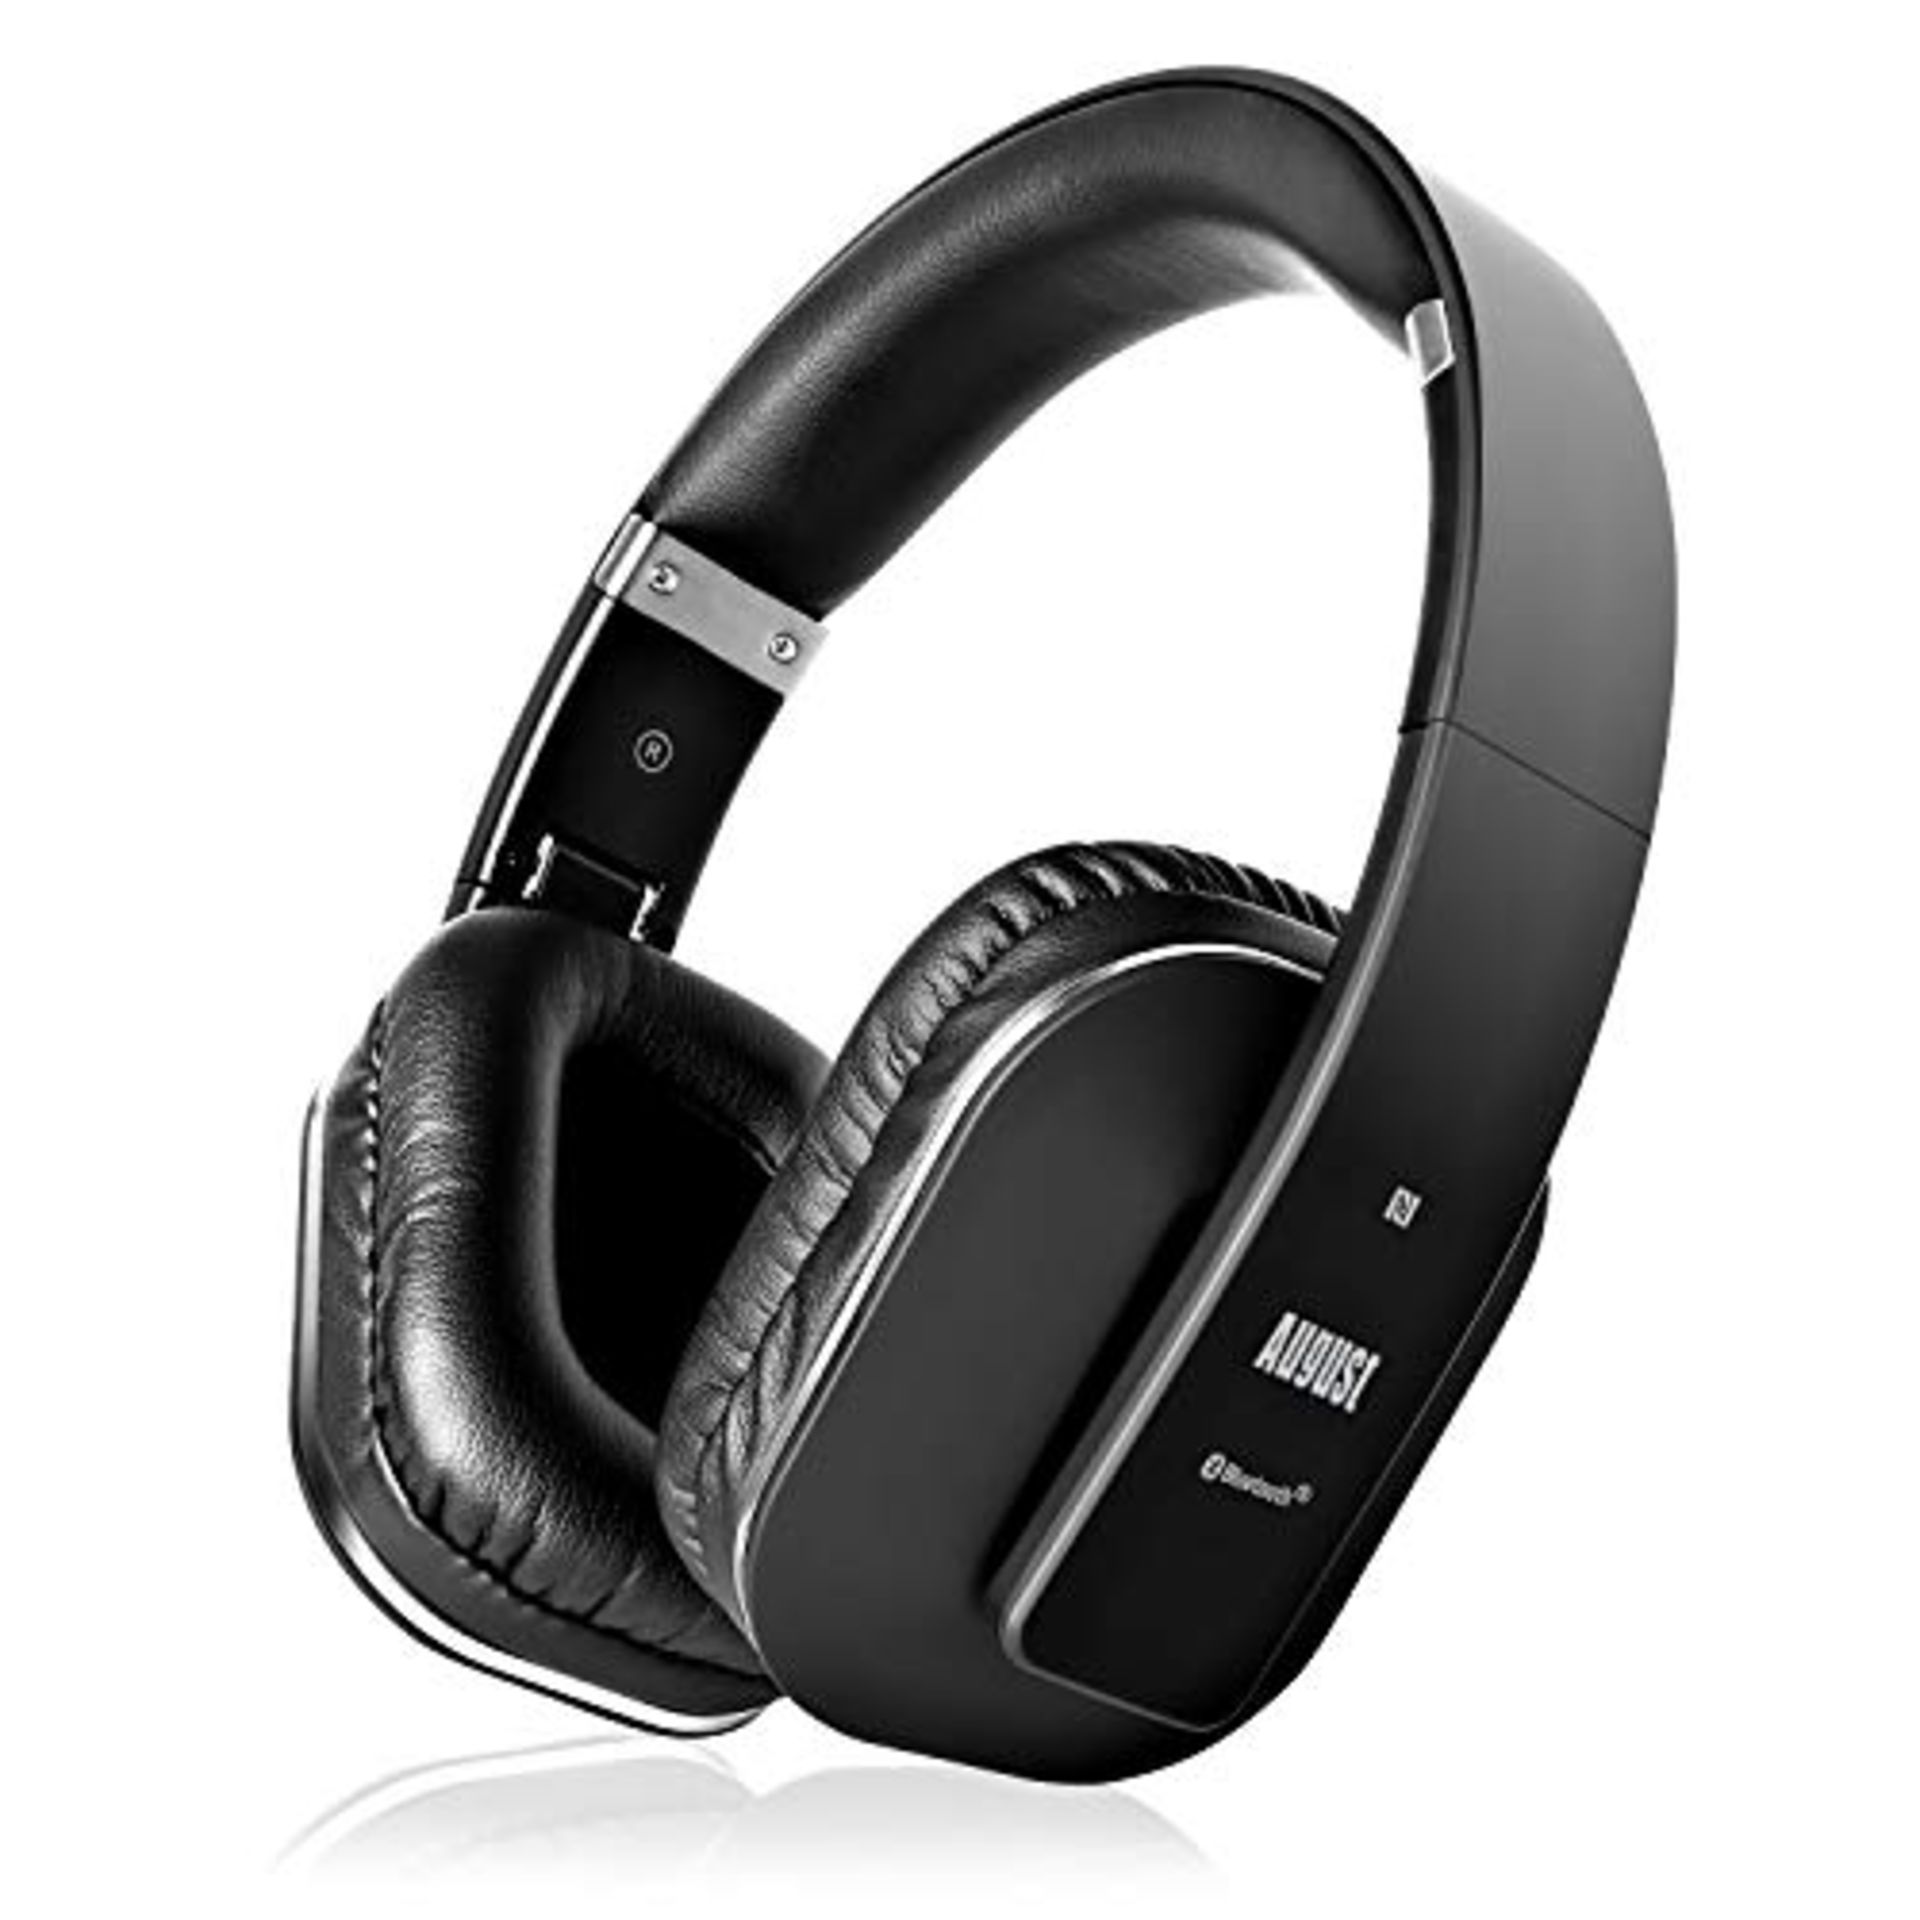 Wireless Bluetooth Headset 4.2 aptX Low Latency - August EP650 - Over Ear, Lightweight - Image 4 of 6